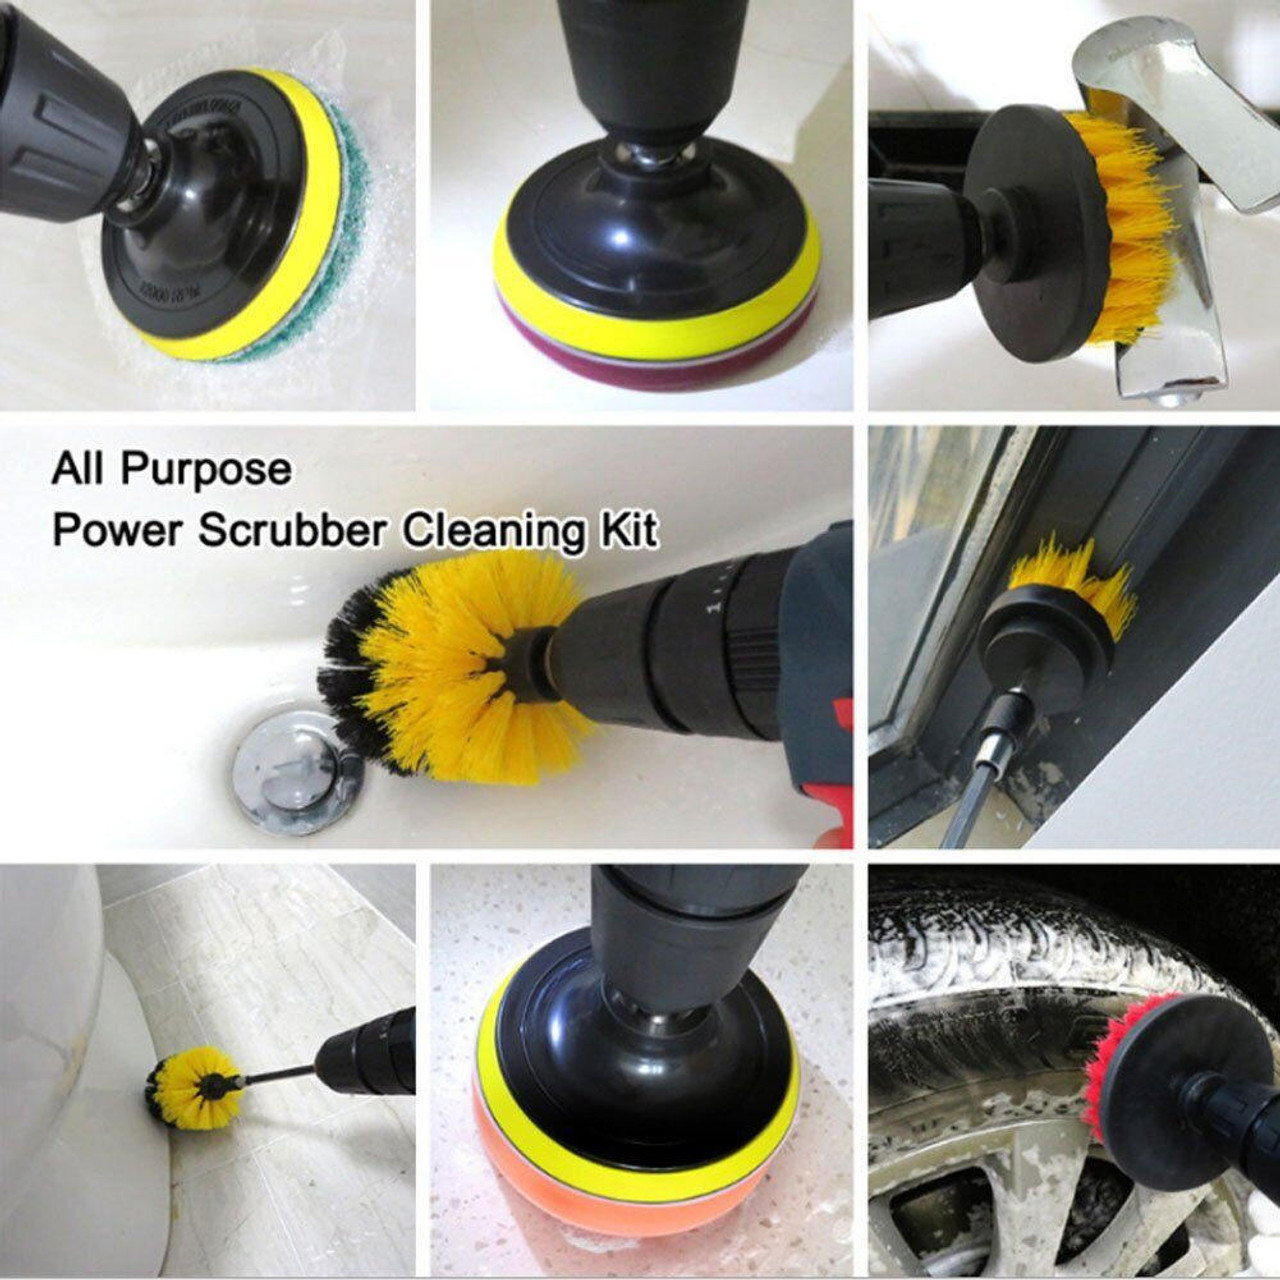 https://cdn11.bigcommerce.com/s-zrh8tkpr8d/images/stencil/1280x1280/products/10076/31545/1221-pcs-electric-drill-brush-attachment-set-cleaning-kit-power-scrubber-pads__81658.1675296151.jpg?c=2&imbypass=on